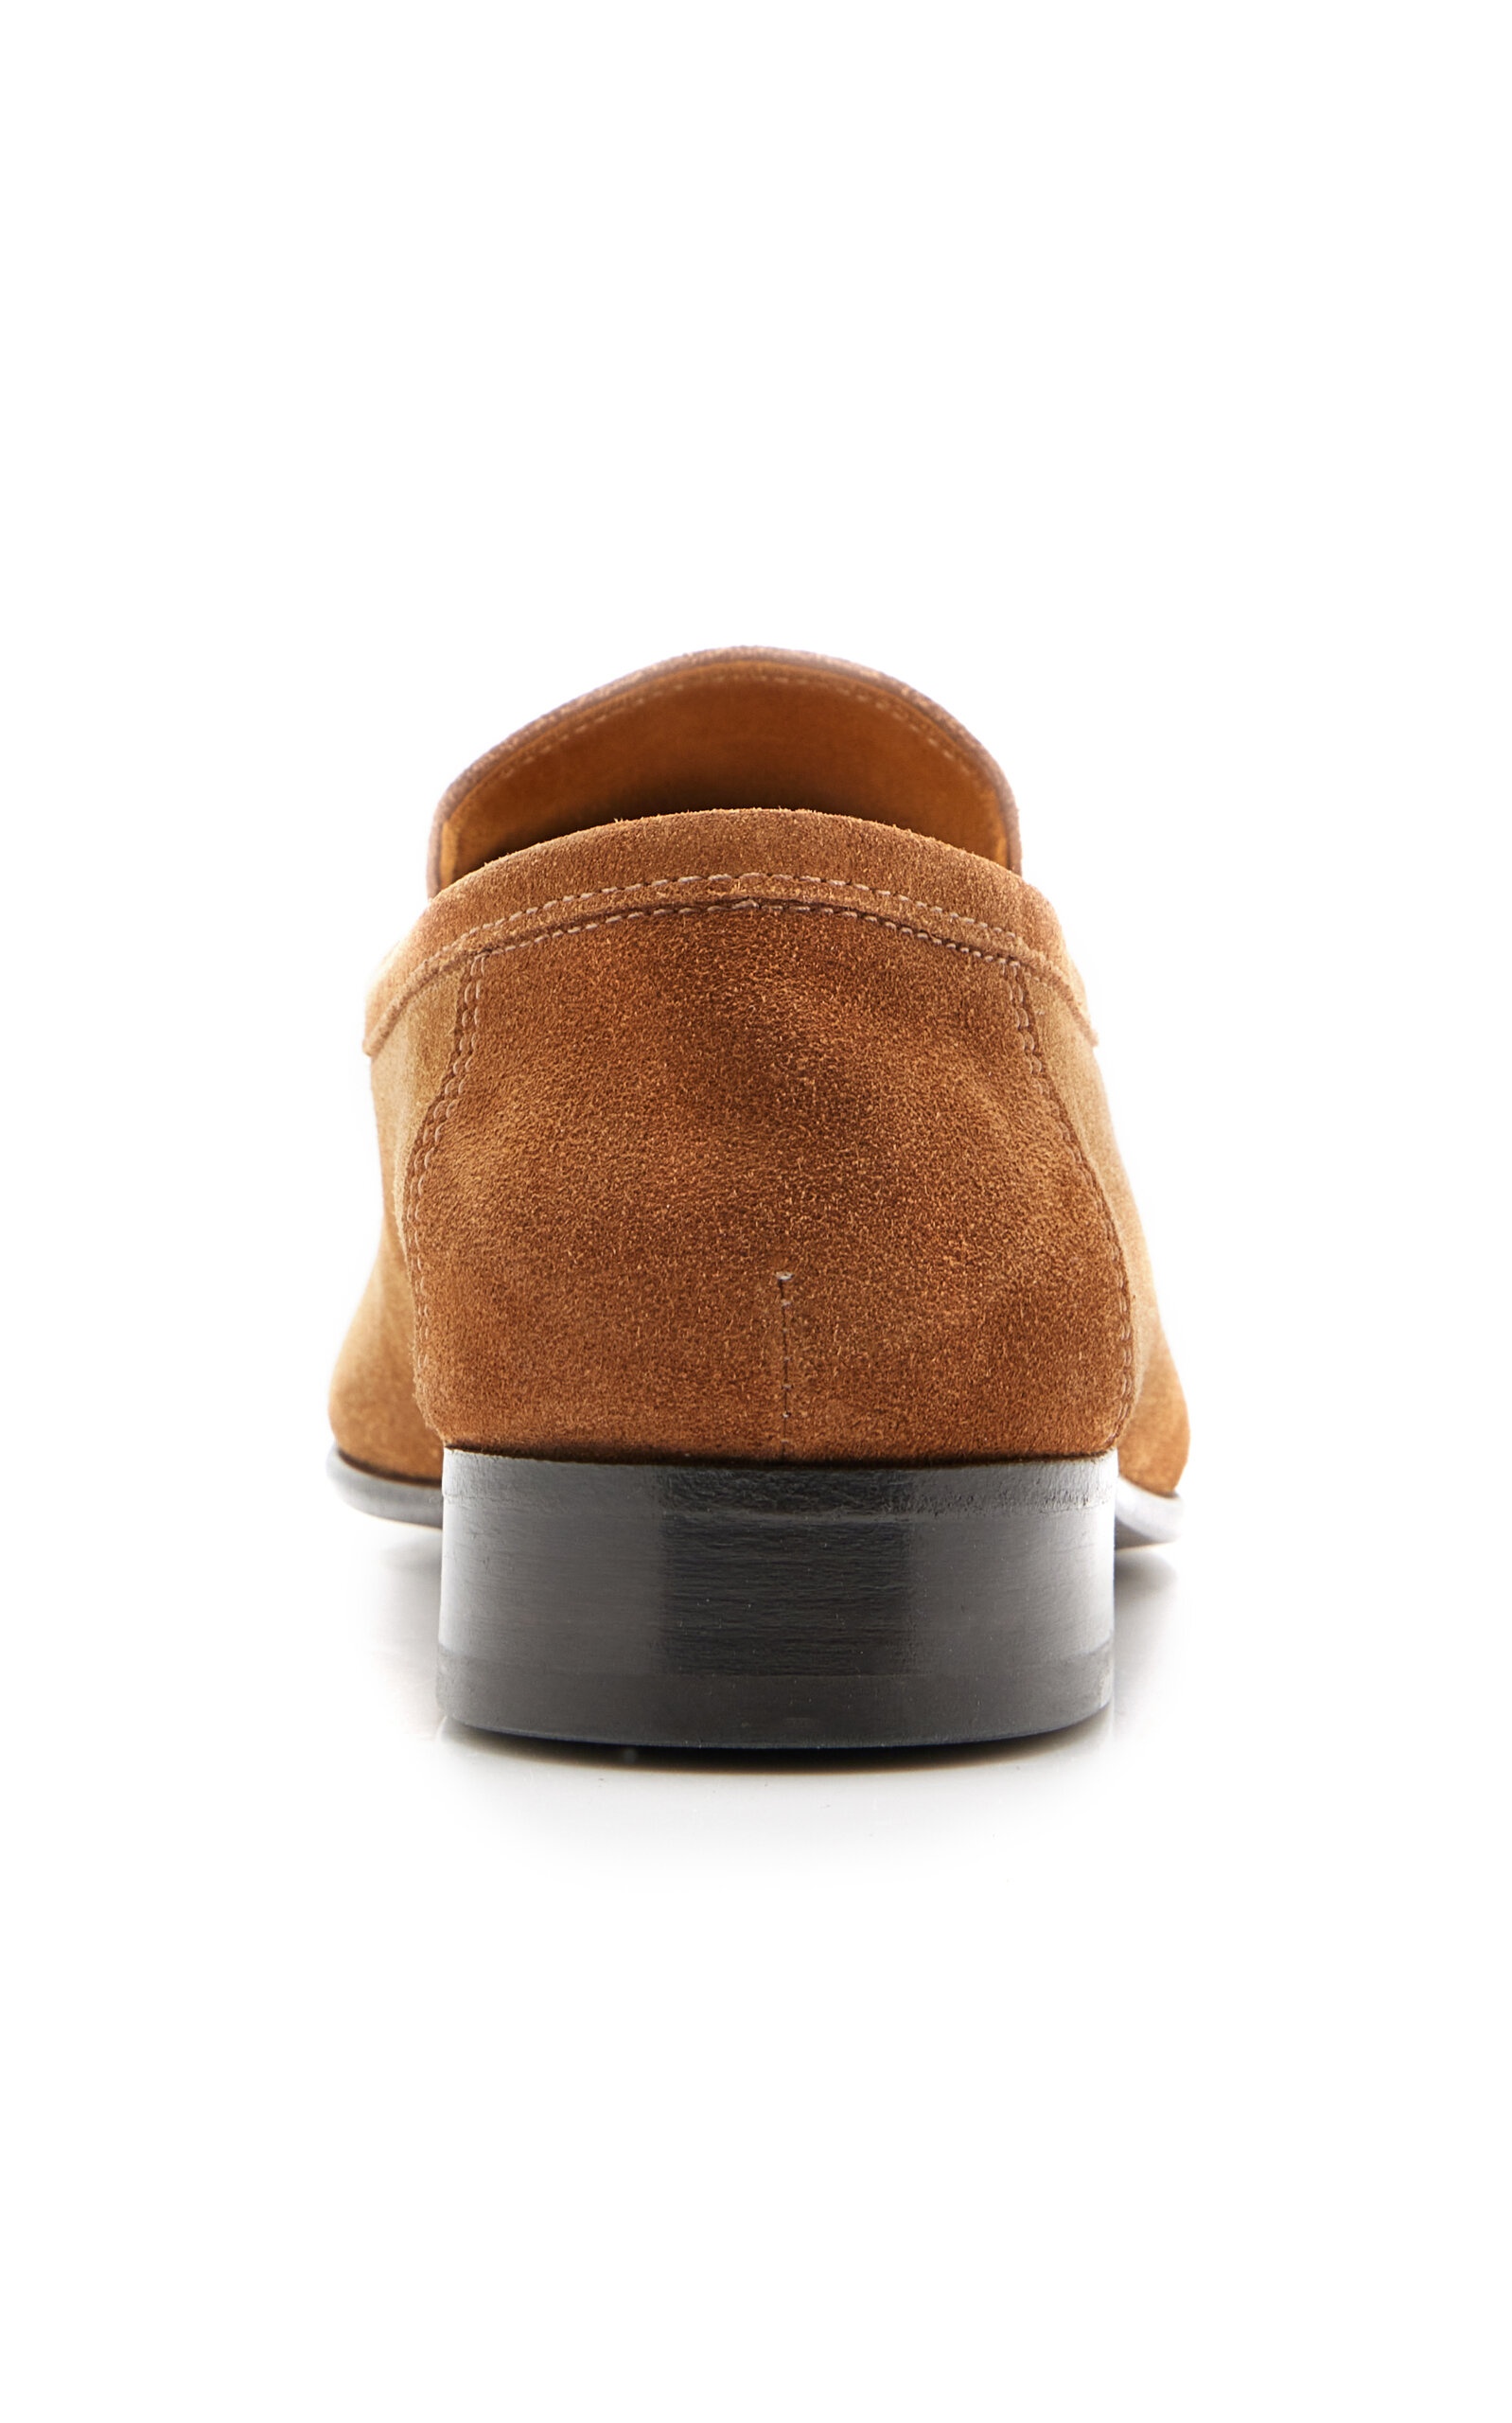 New Soft Suede Loafers tan - 5